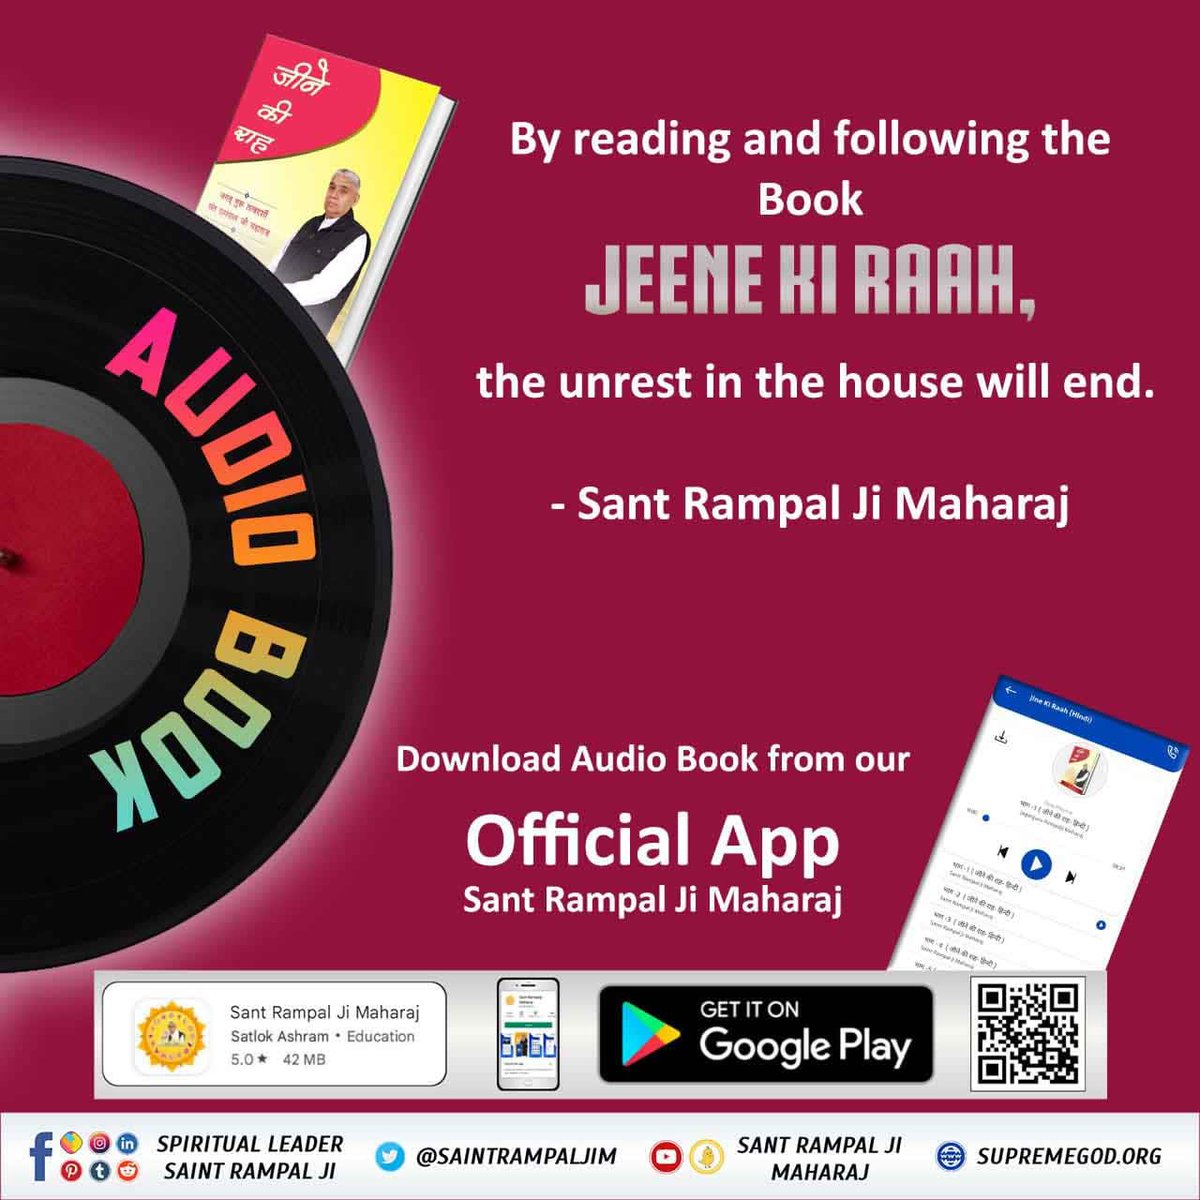 #GodMorningWednsday
The Book “Jeene Ki Raah (Way of Living)” is worthy of being kept in every home. By reading and following it, you will remain happy, both in this world and the other.#wednesdaythought

- Sant Rampal Ji Maharaj